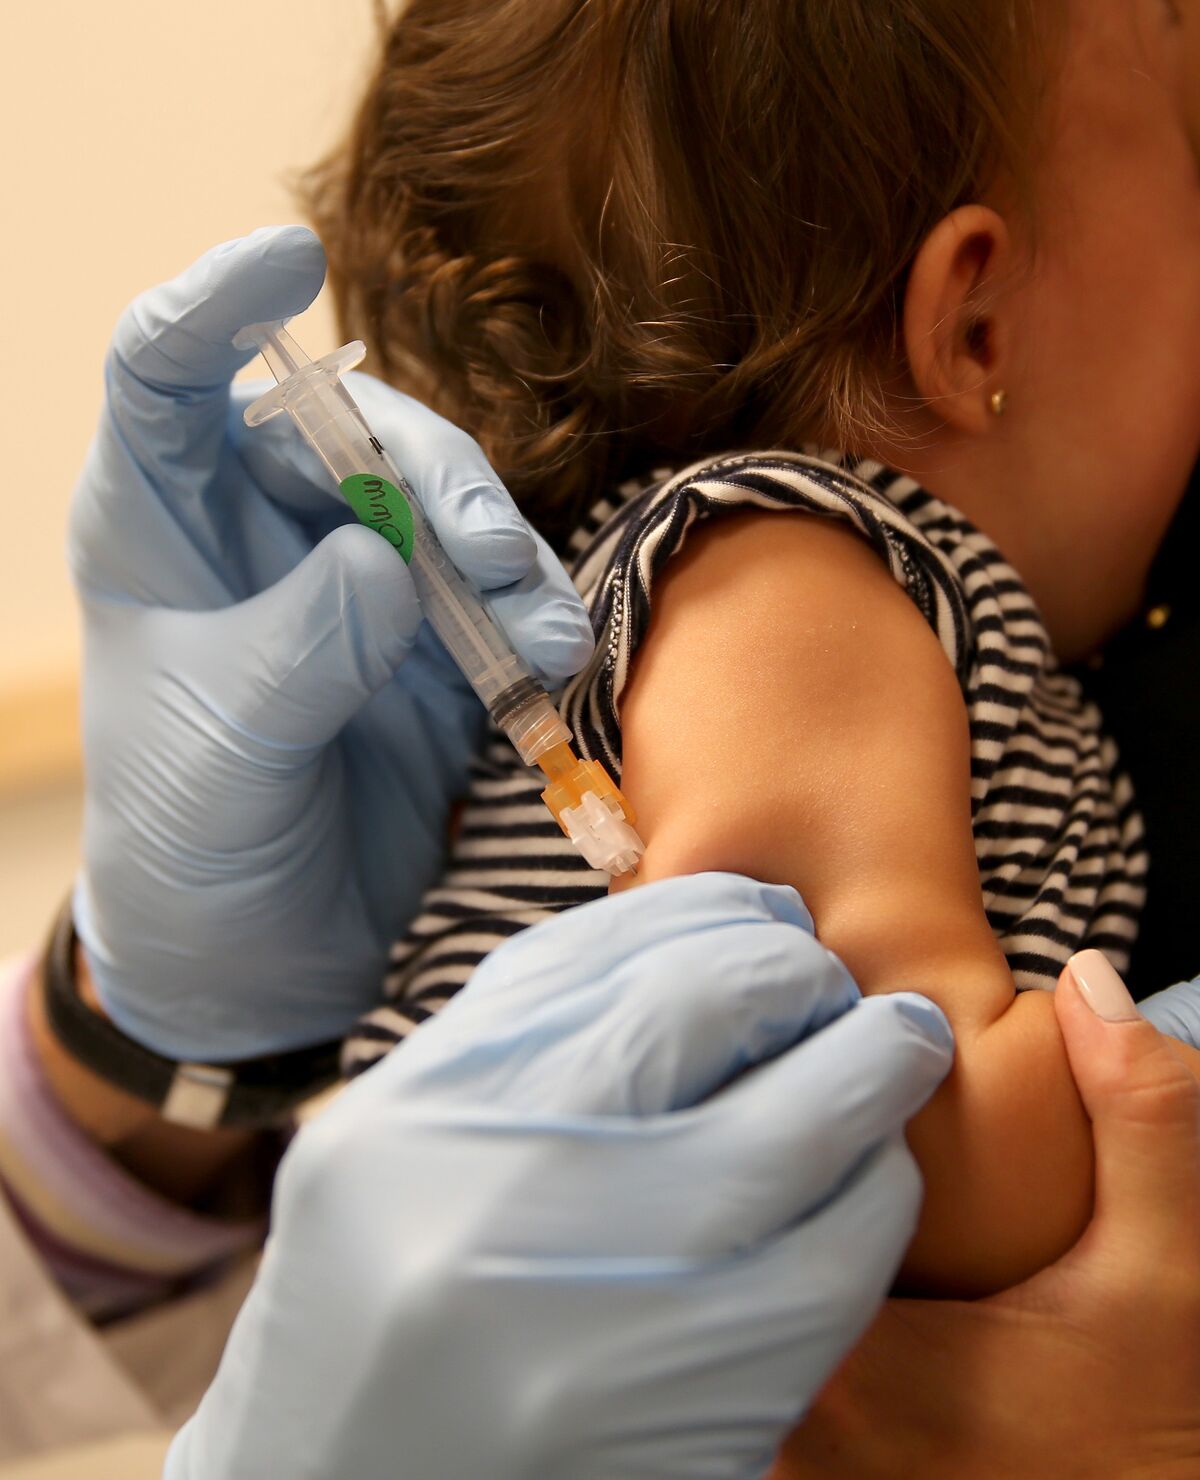 Convincing Religious Groups to Get Measles Shots